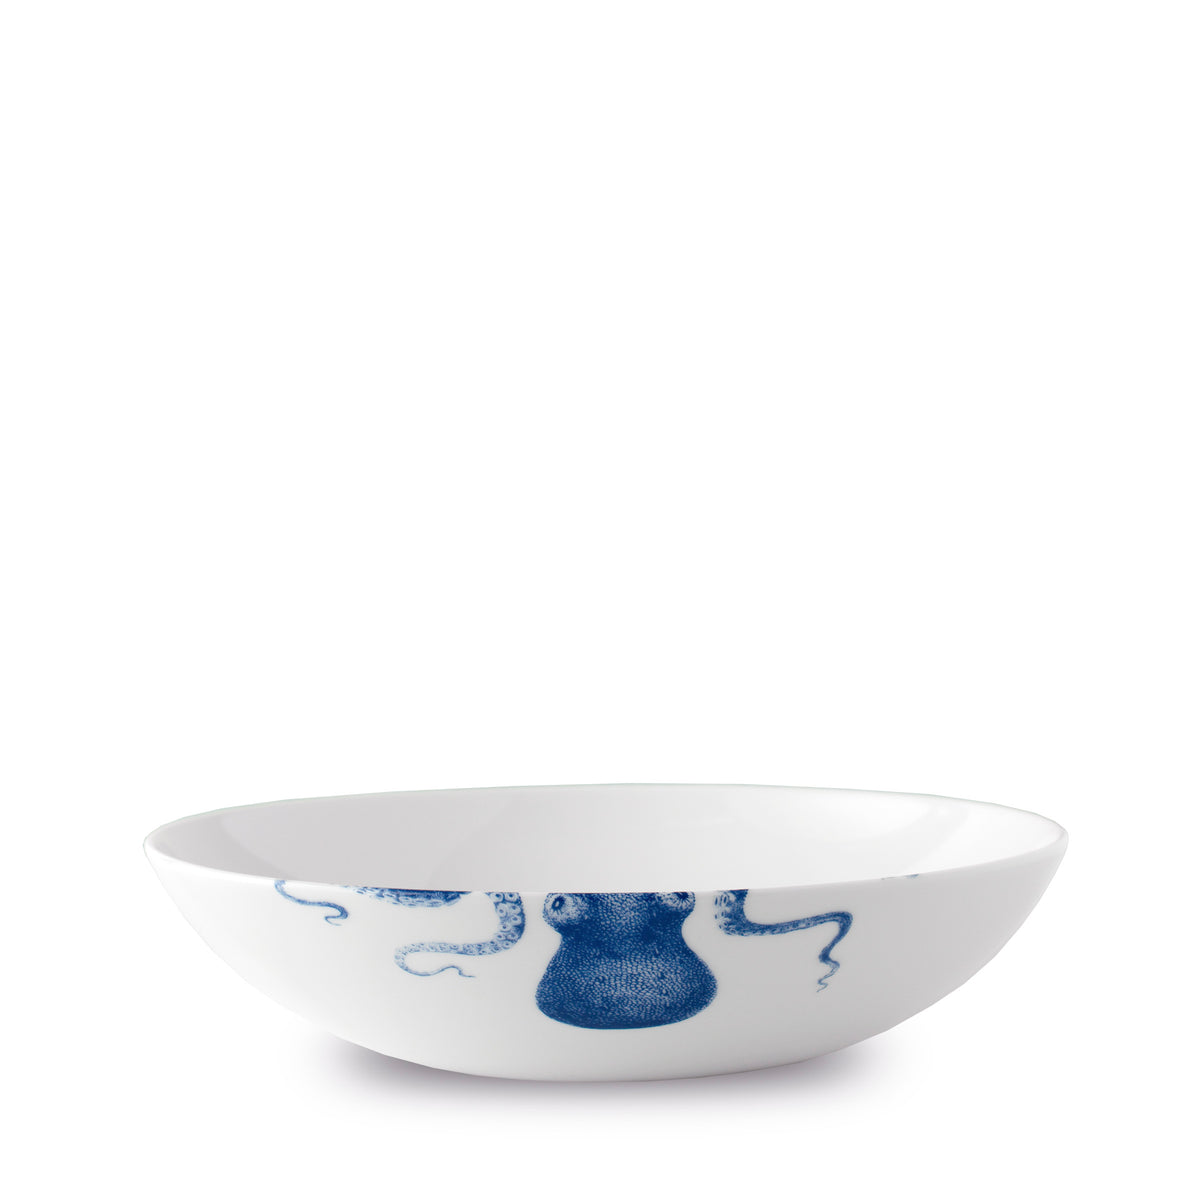 White high-fired porcelain Lucy Entrée Bowl by Caskata Artisanal Home with a blue octopus design on the exterior.